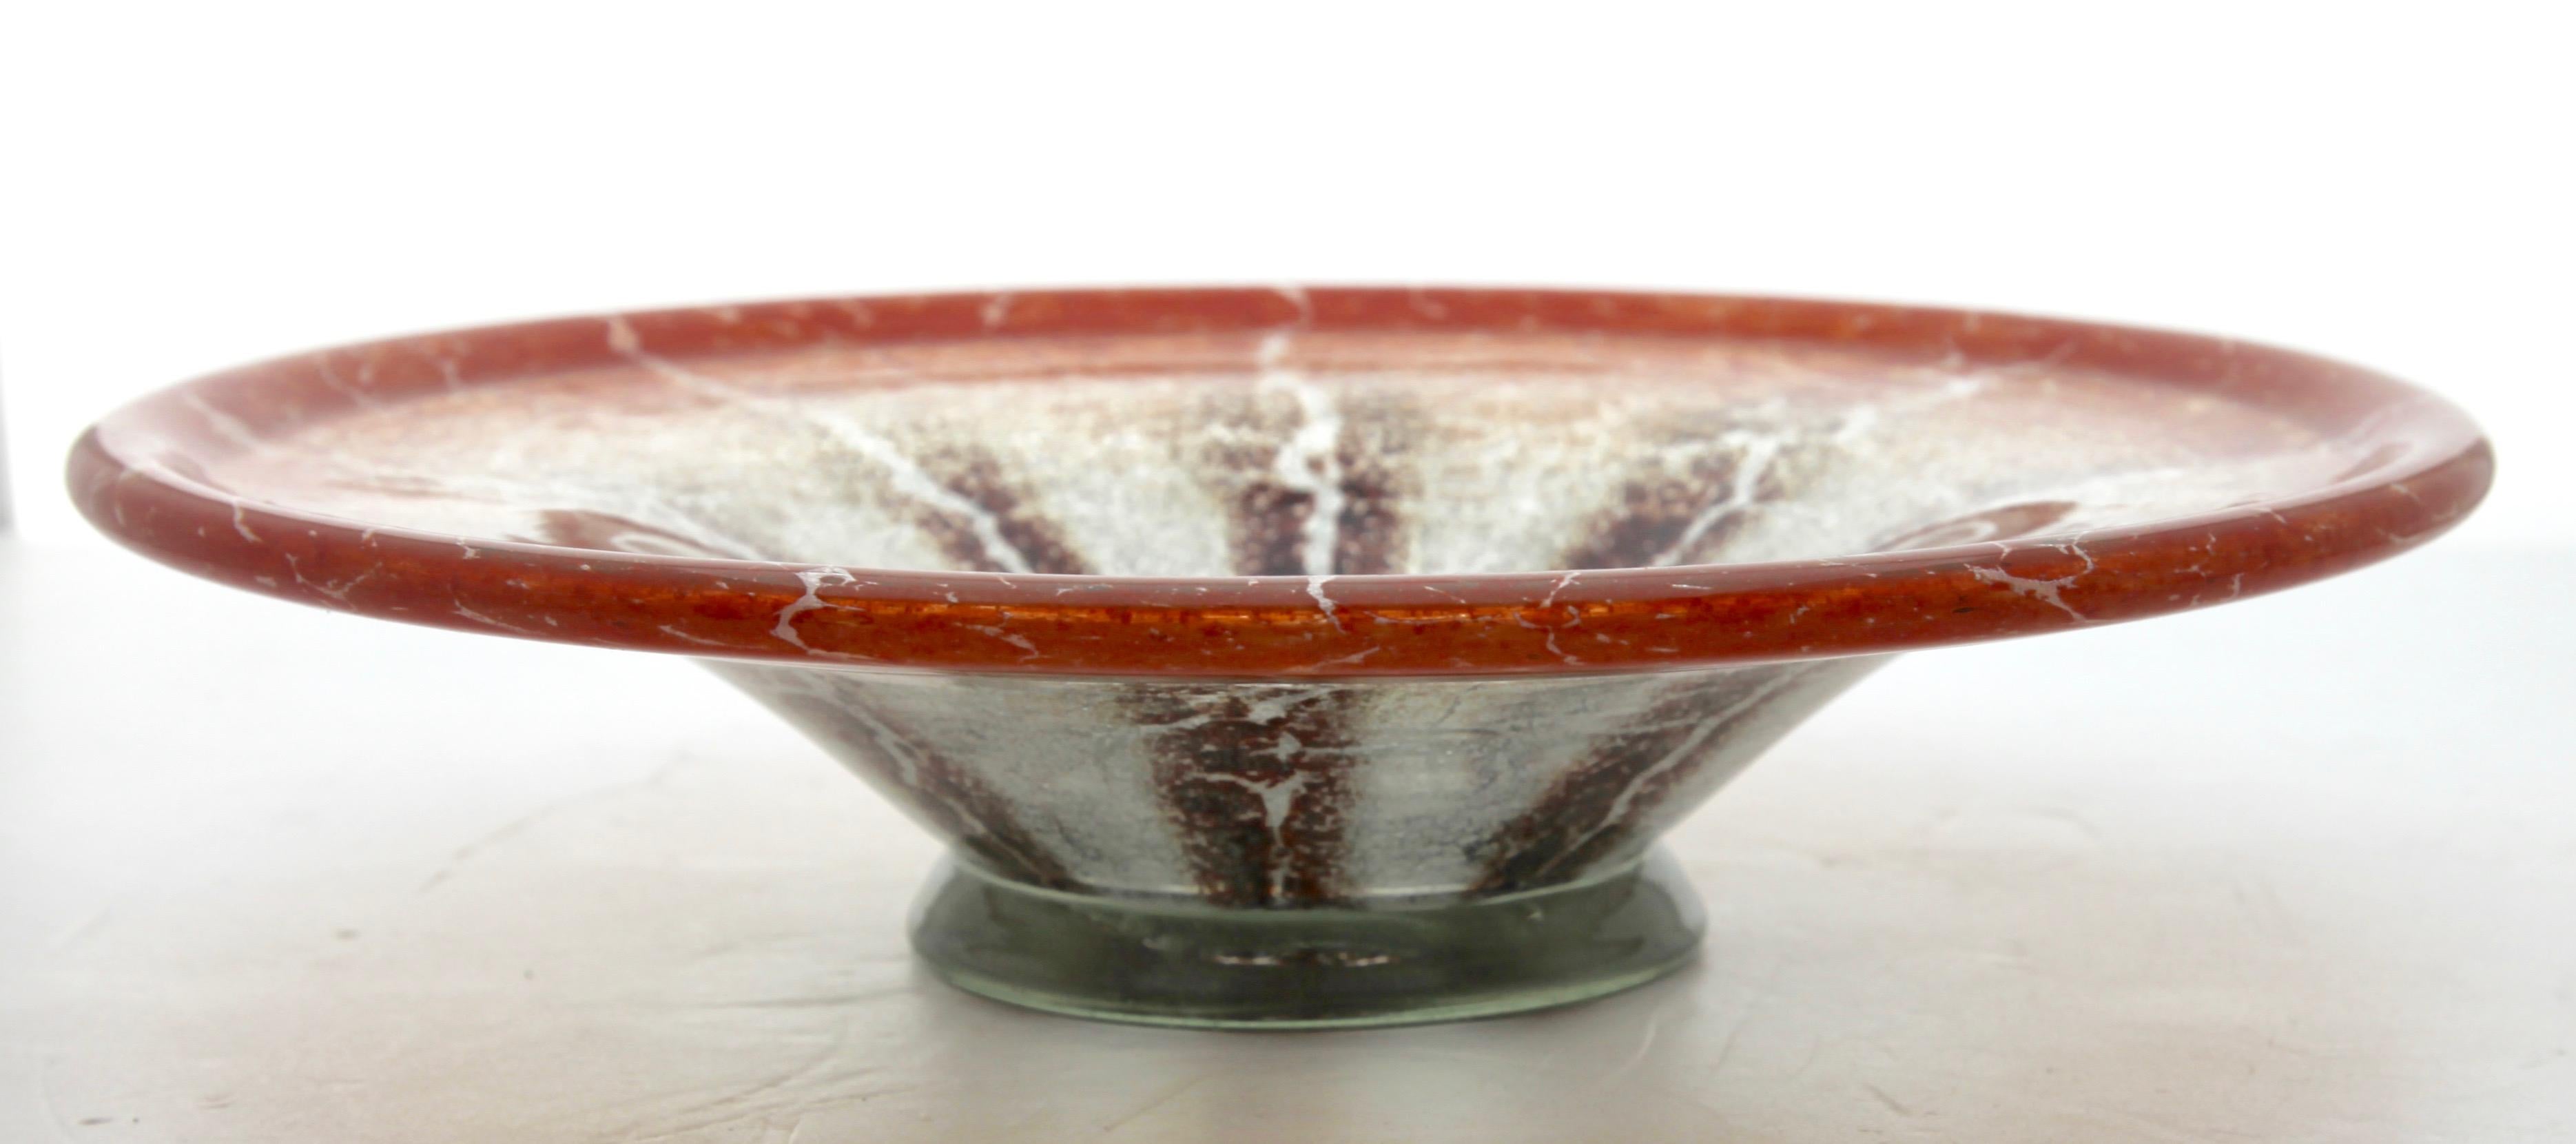 'Ikora' Art Glass Bowl, Produced, by WMF in Germany, 1930s by Karl Wiedmann For Sale 1